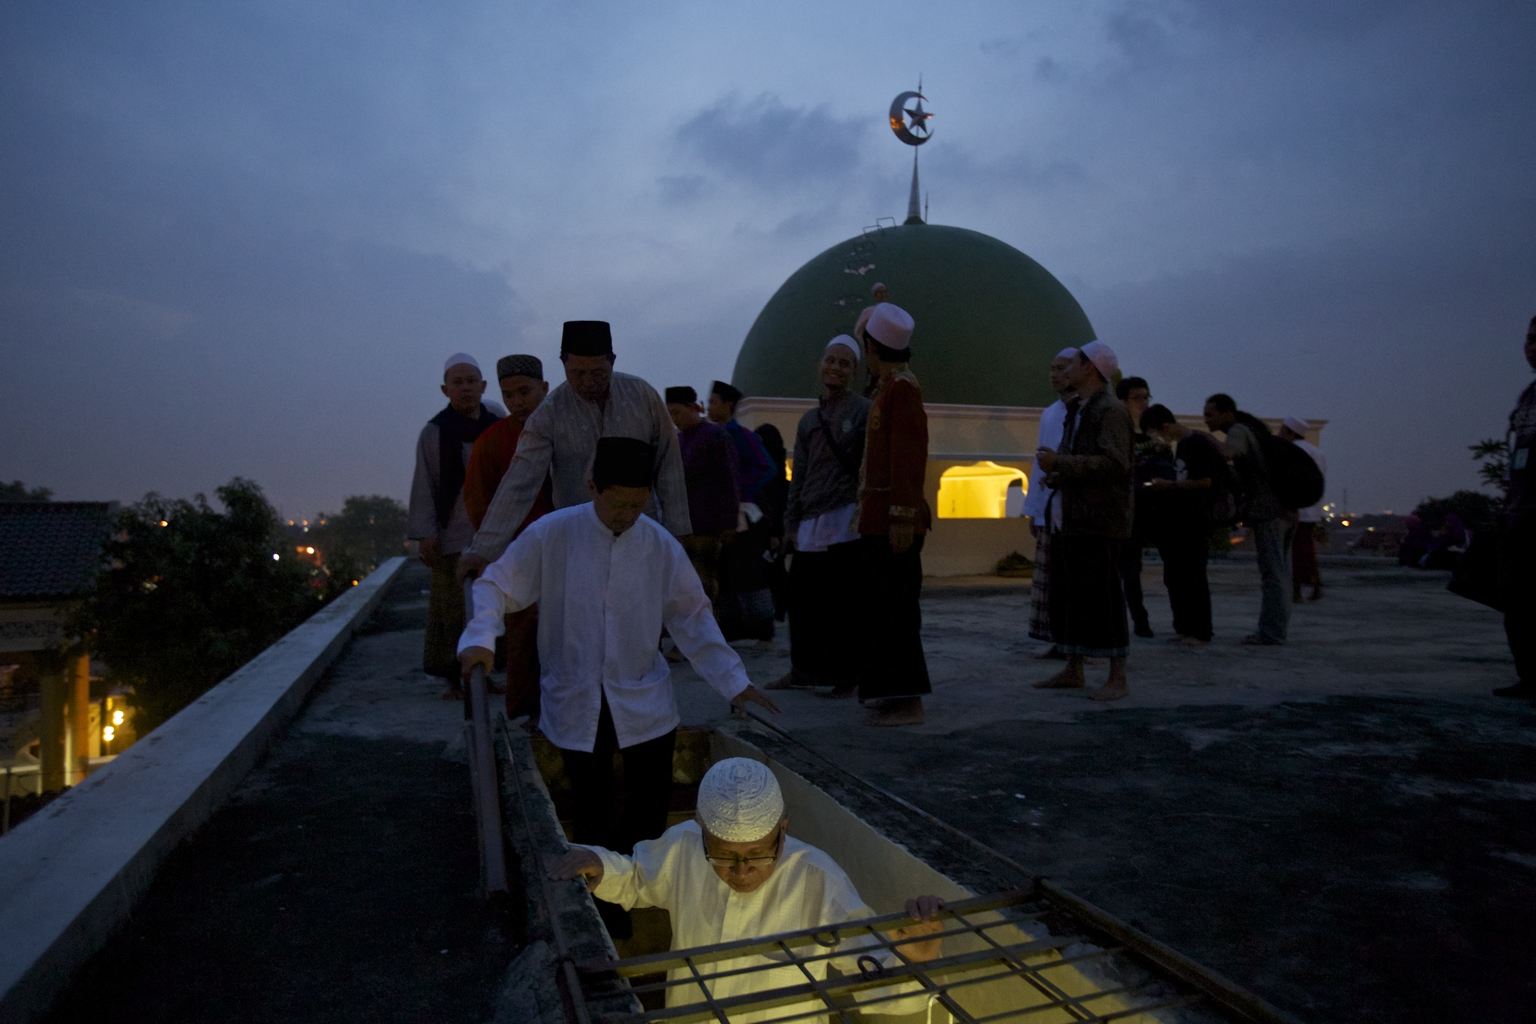 indonesianmuslimsobservefirstday20140627 4 - In pictures: Ramadhan 2014 around the world